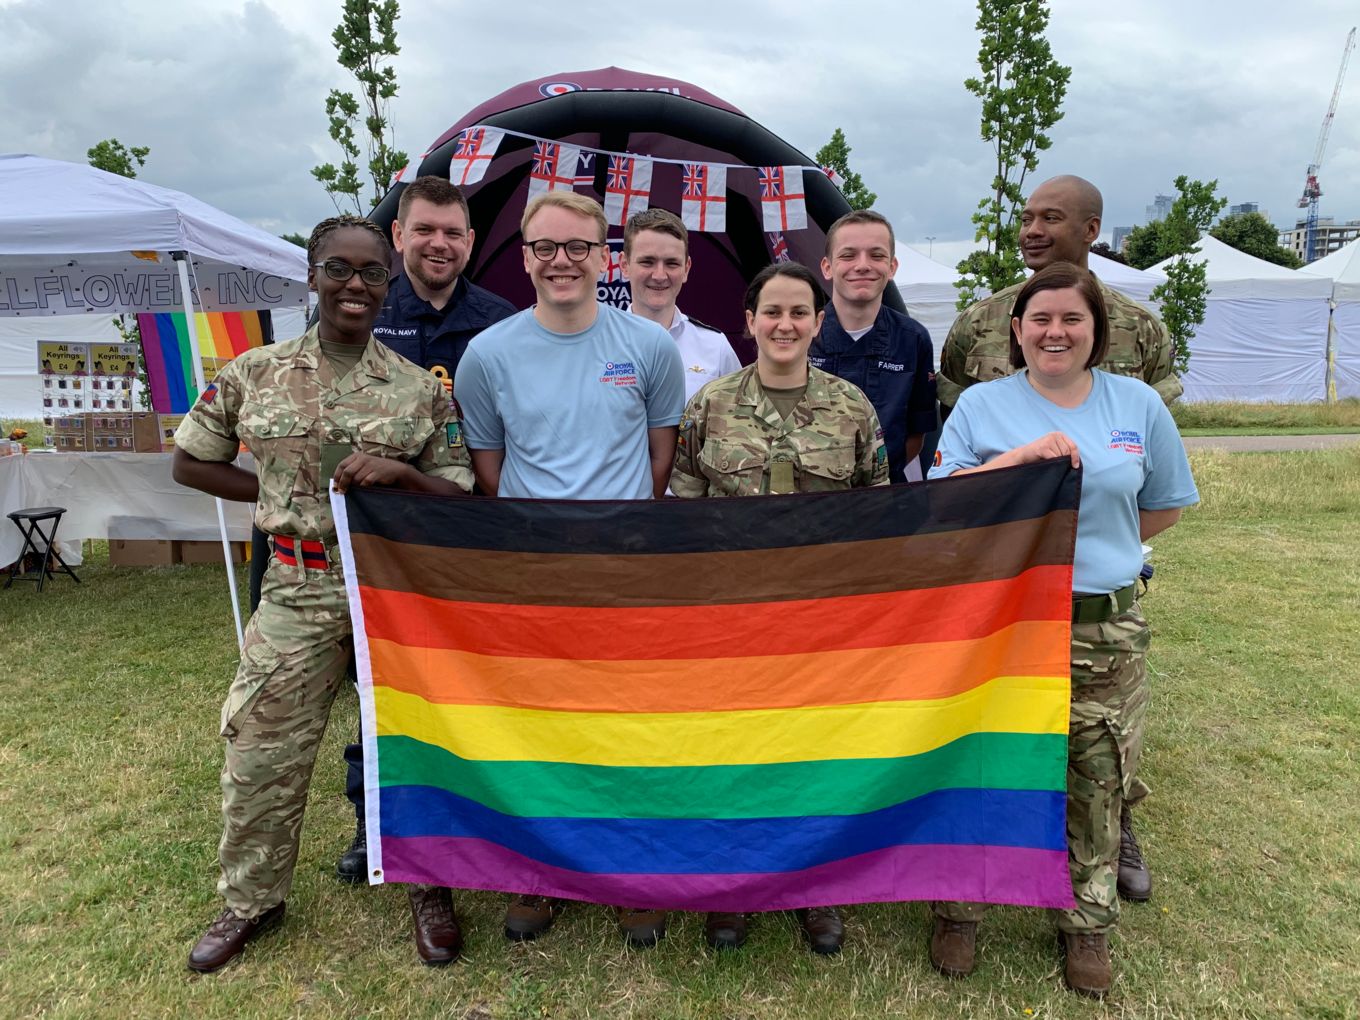 Personnel stand with the pride flag.